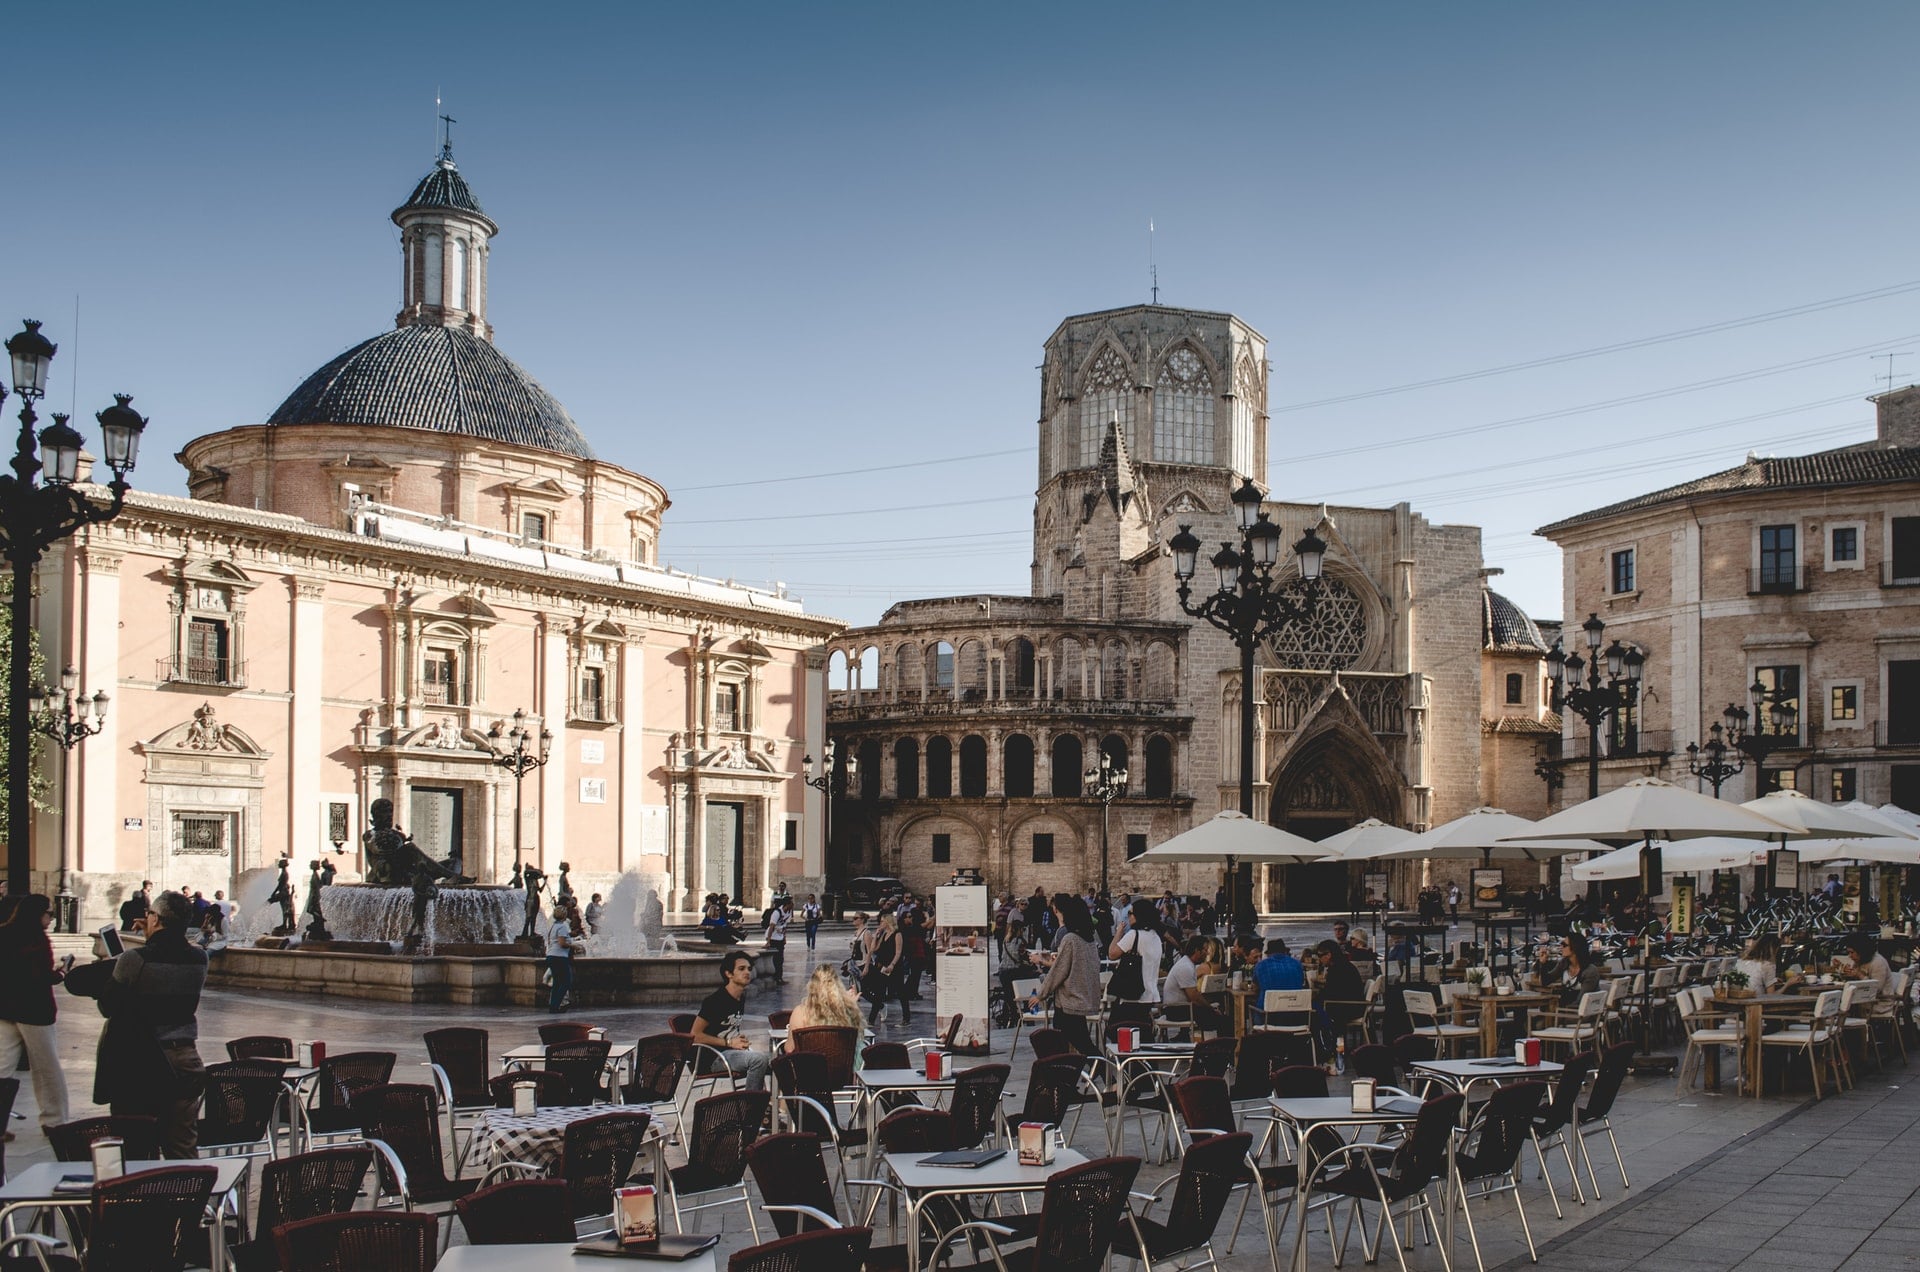 valencia-old-town-with-historic-buildings-and-people-dining-outdoors-2-days-in-valencia-itinerary